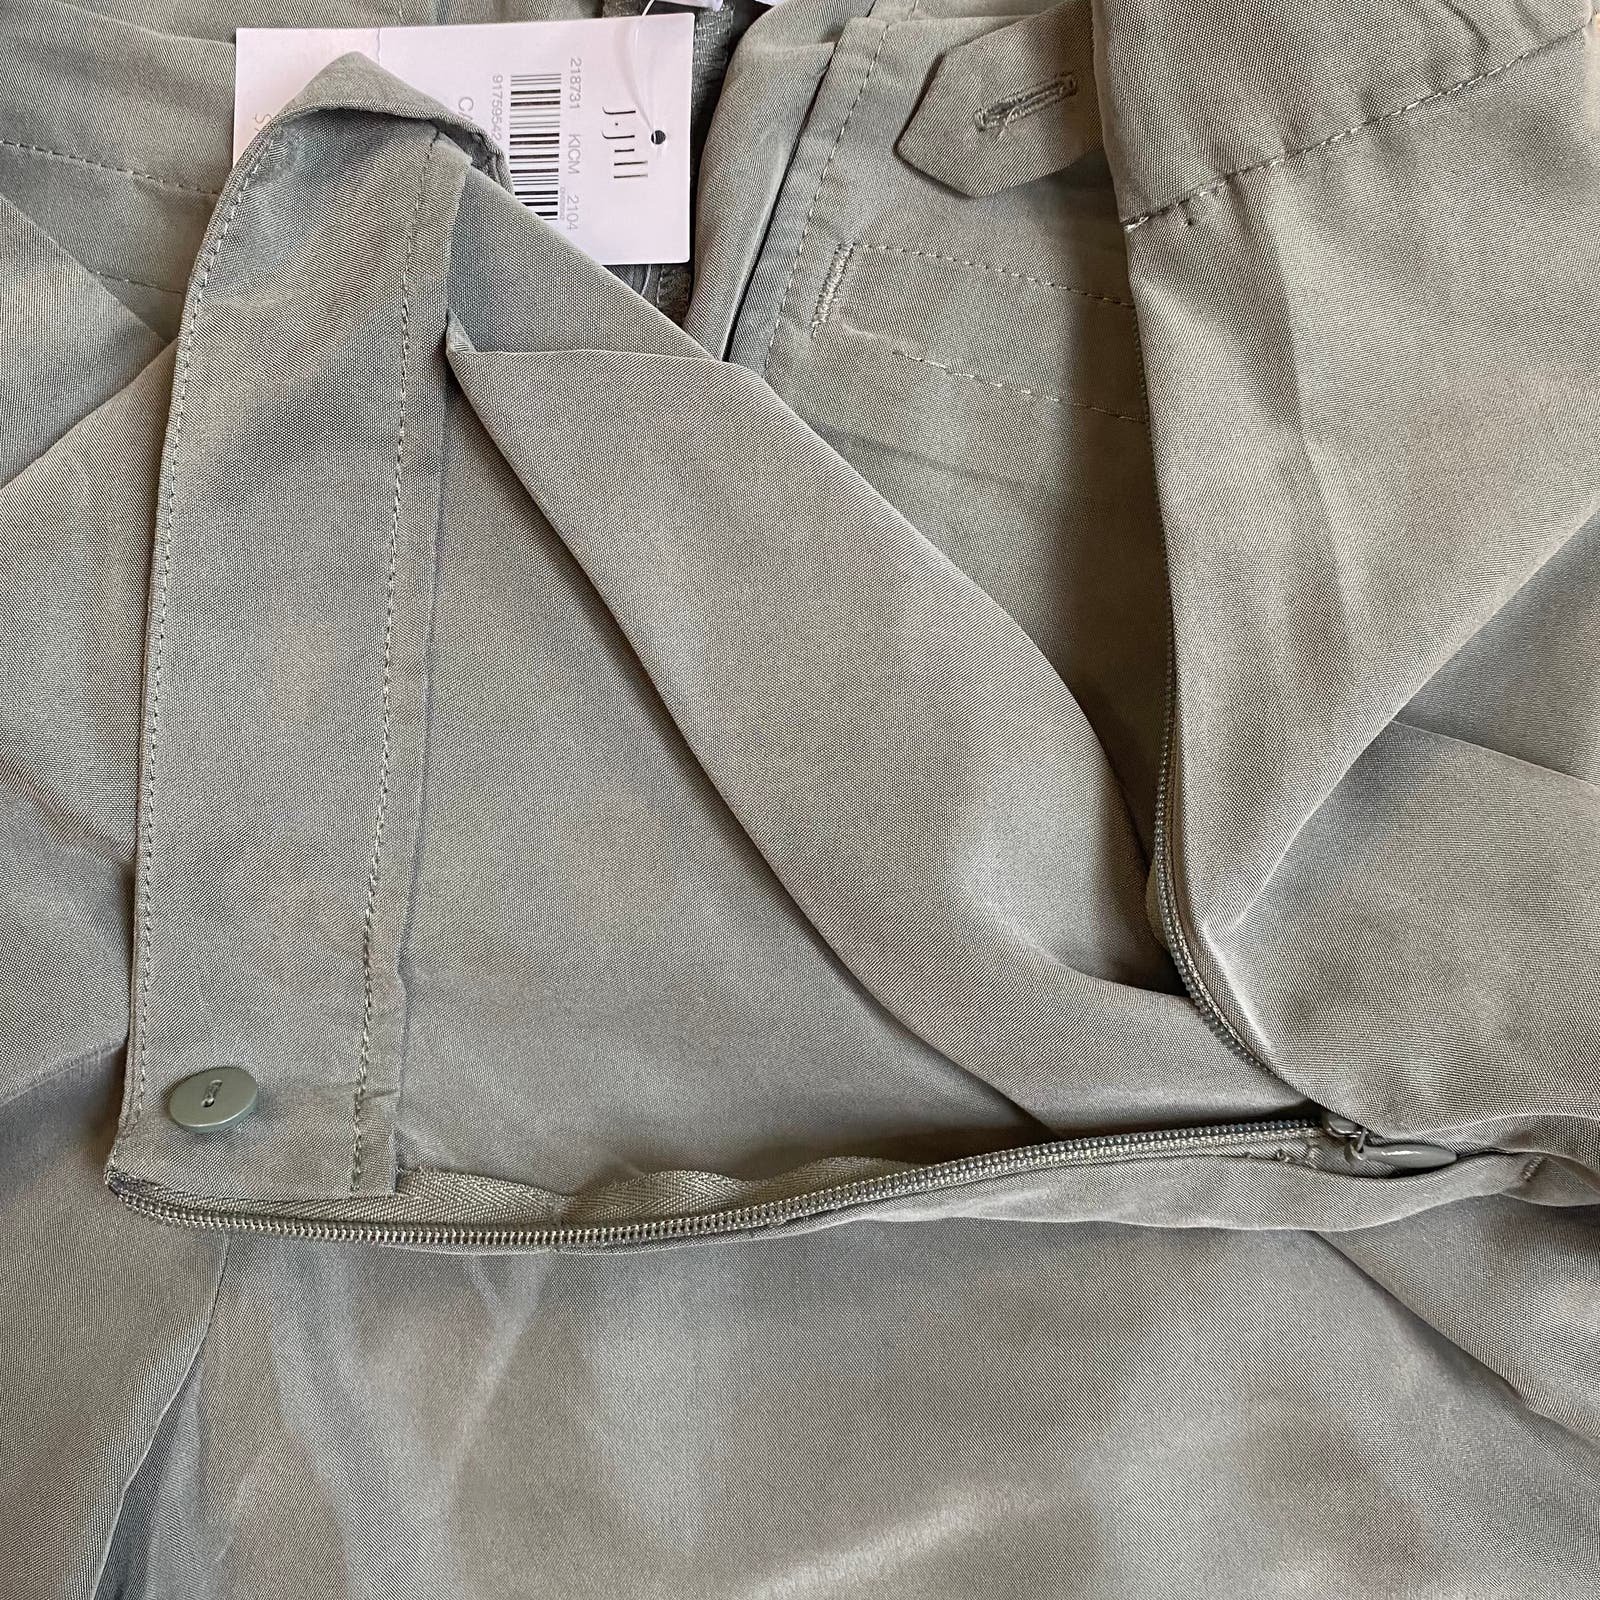 large selection J. Jill Cropped Wide Leg Pants Caraway New with Tags NWT Olive Green Medium hhUTSUnTL Great